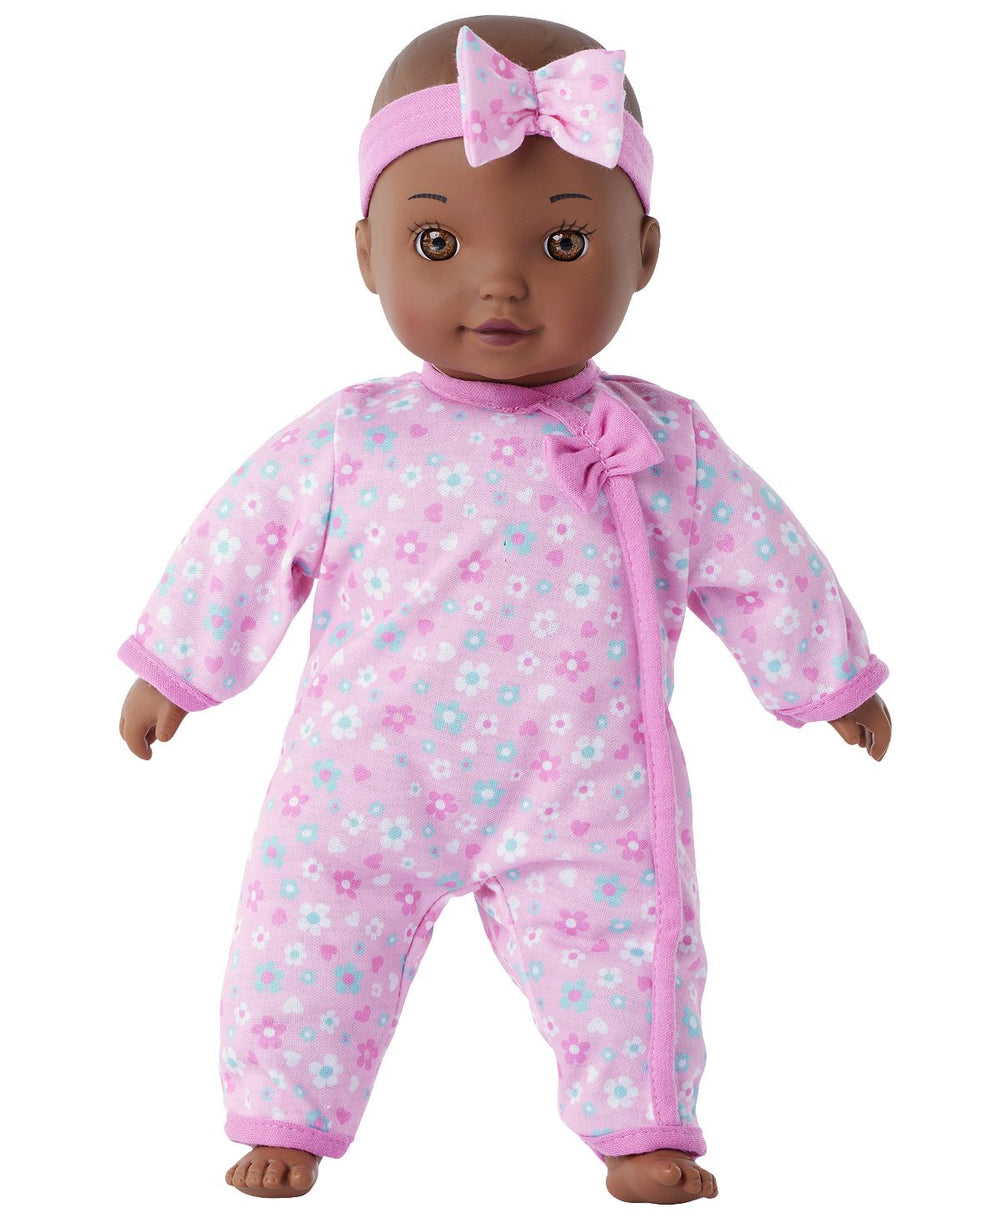 You & Me 12 inch Interactive Chatter & Coo Baby Doll - Pink Floral Sleeper